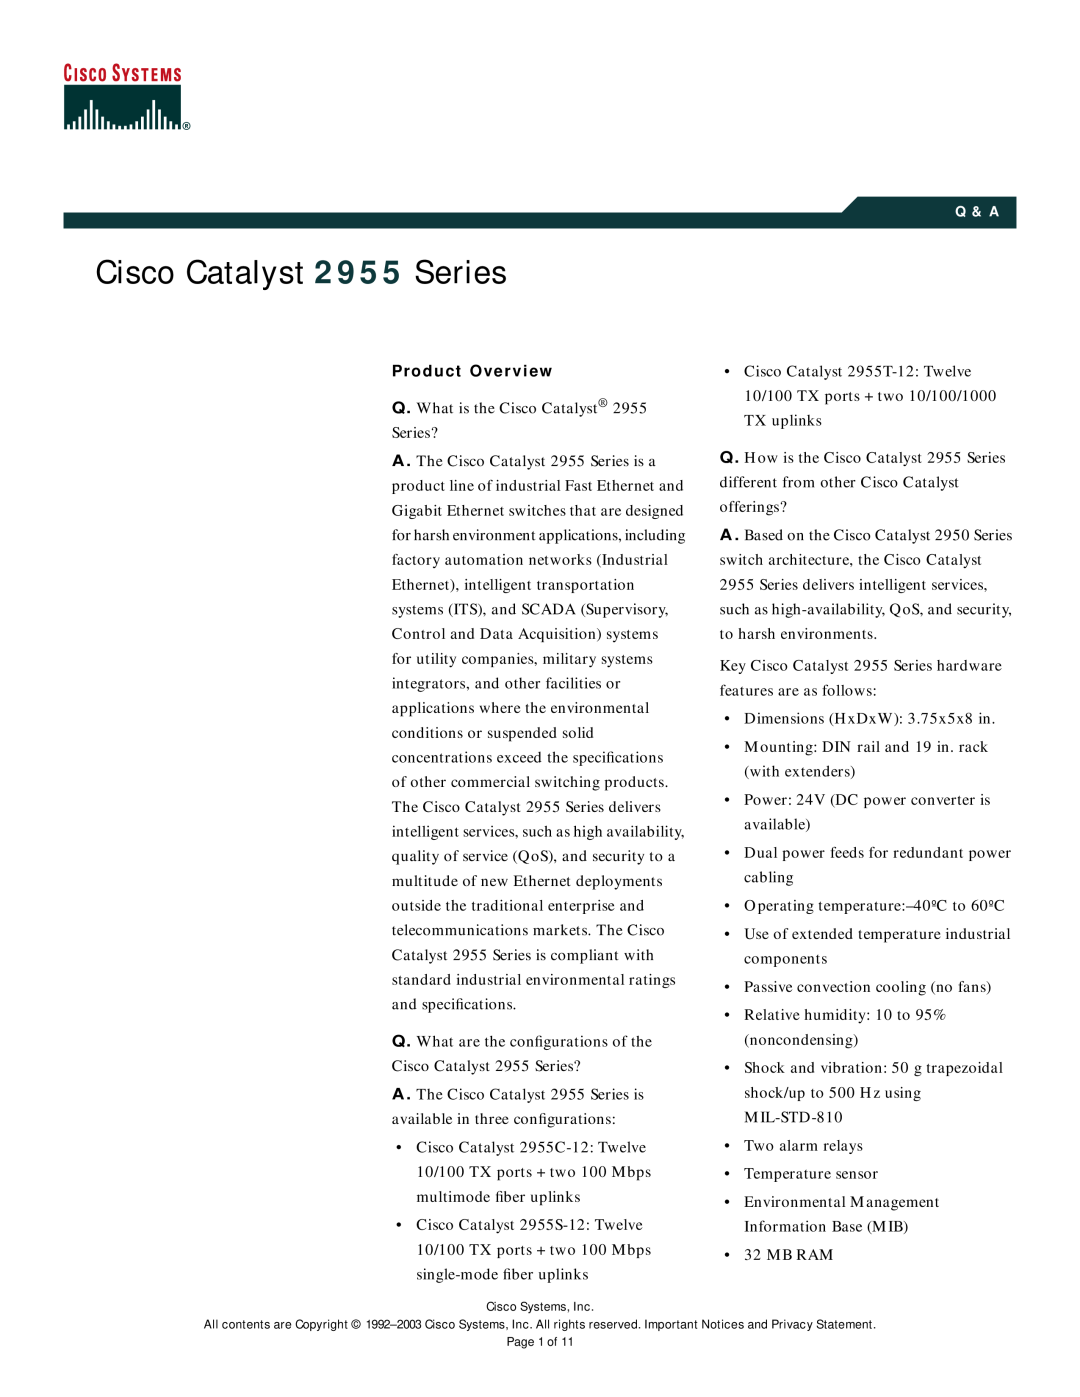 Cisco Systems specifications Product Overview, Cisco Catalyst 2955 Series 